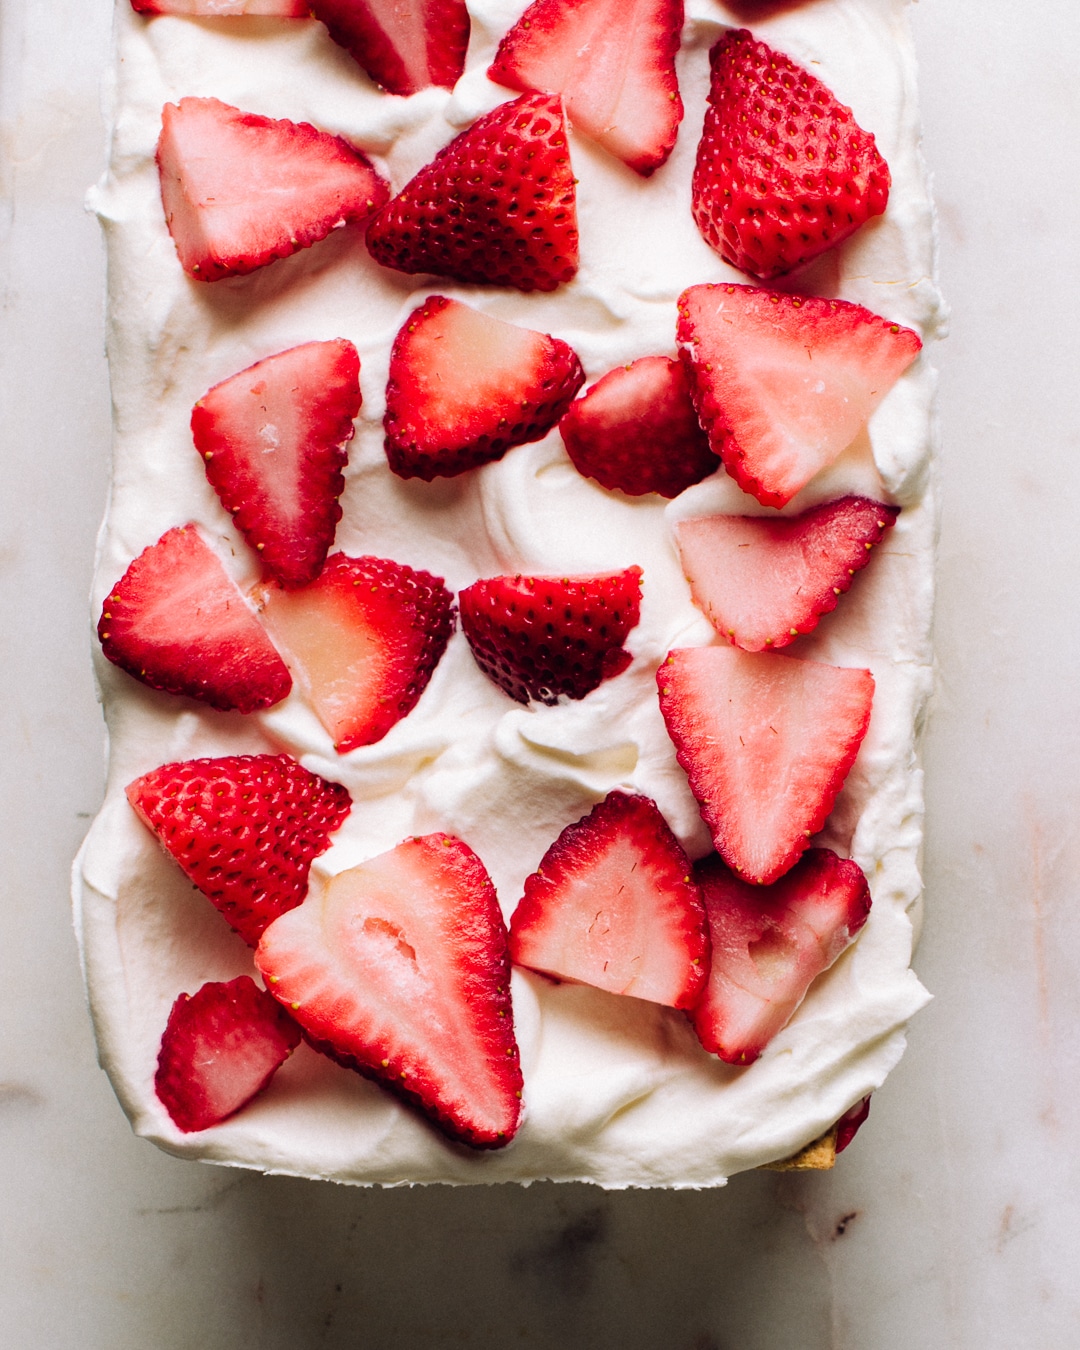 A whole strawberry icebox cake before slicing.